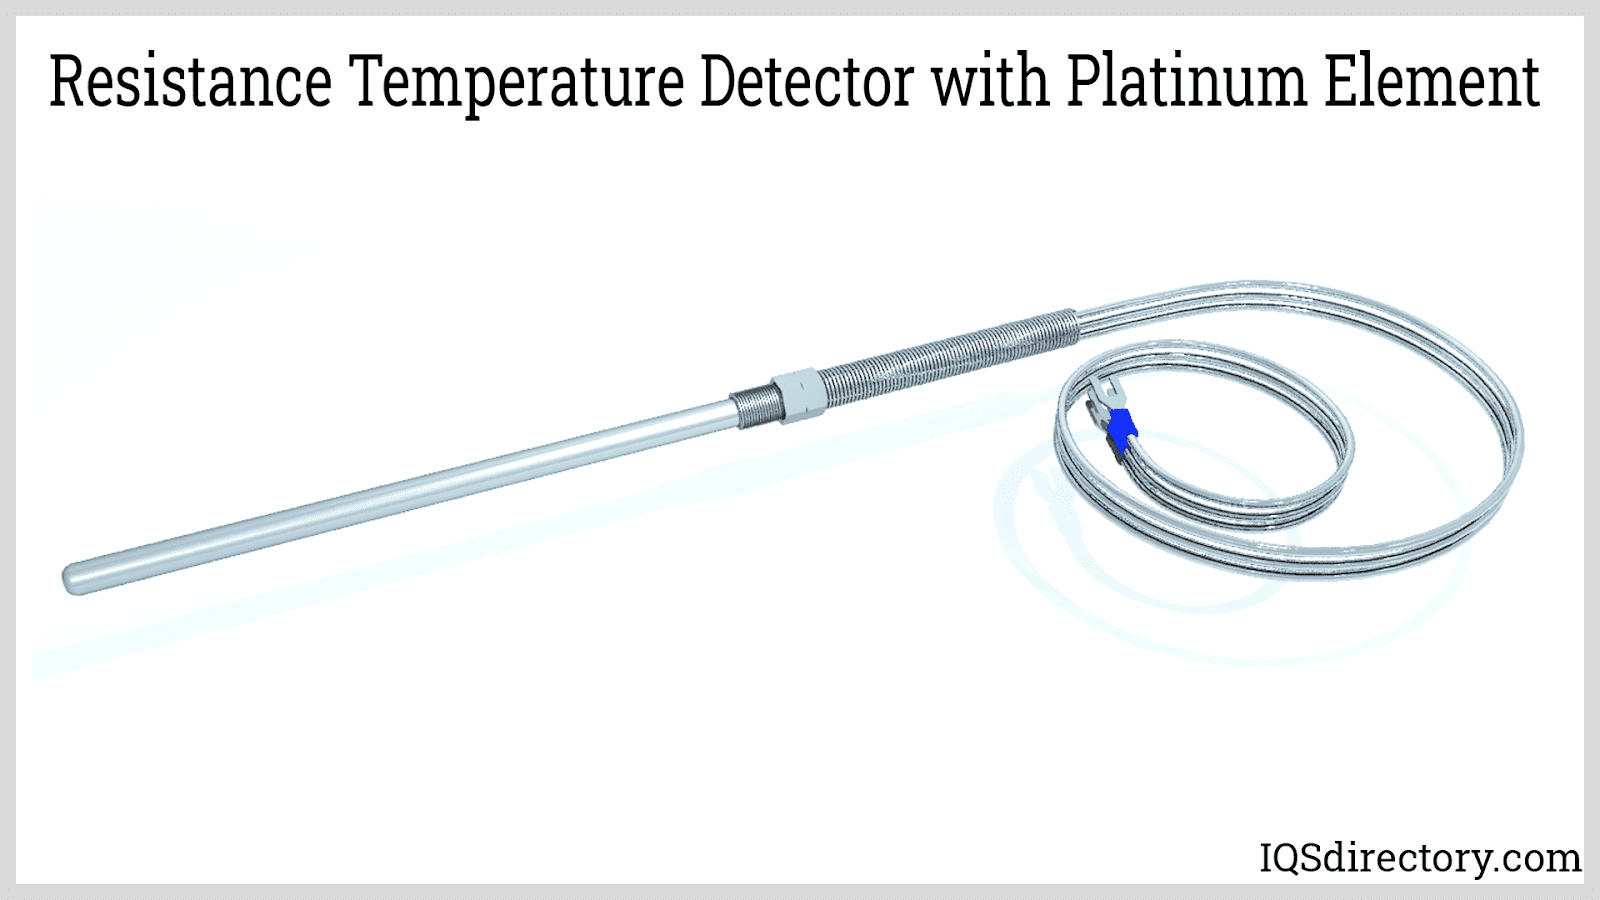 https://www.iqsdirectory.com/articles/thermocouple/rtd-sensors/resistance-temperature-detector-with-platinum-element.png